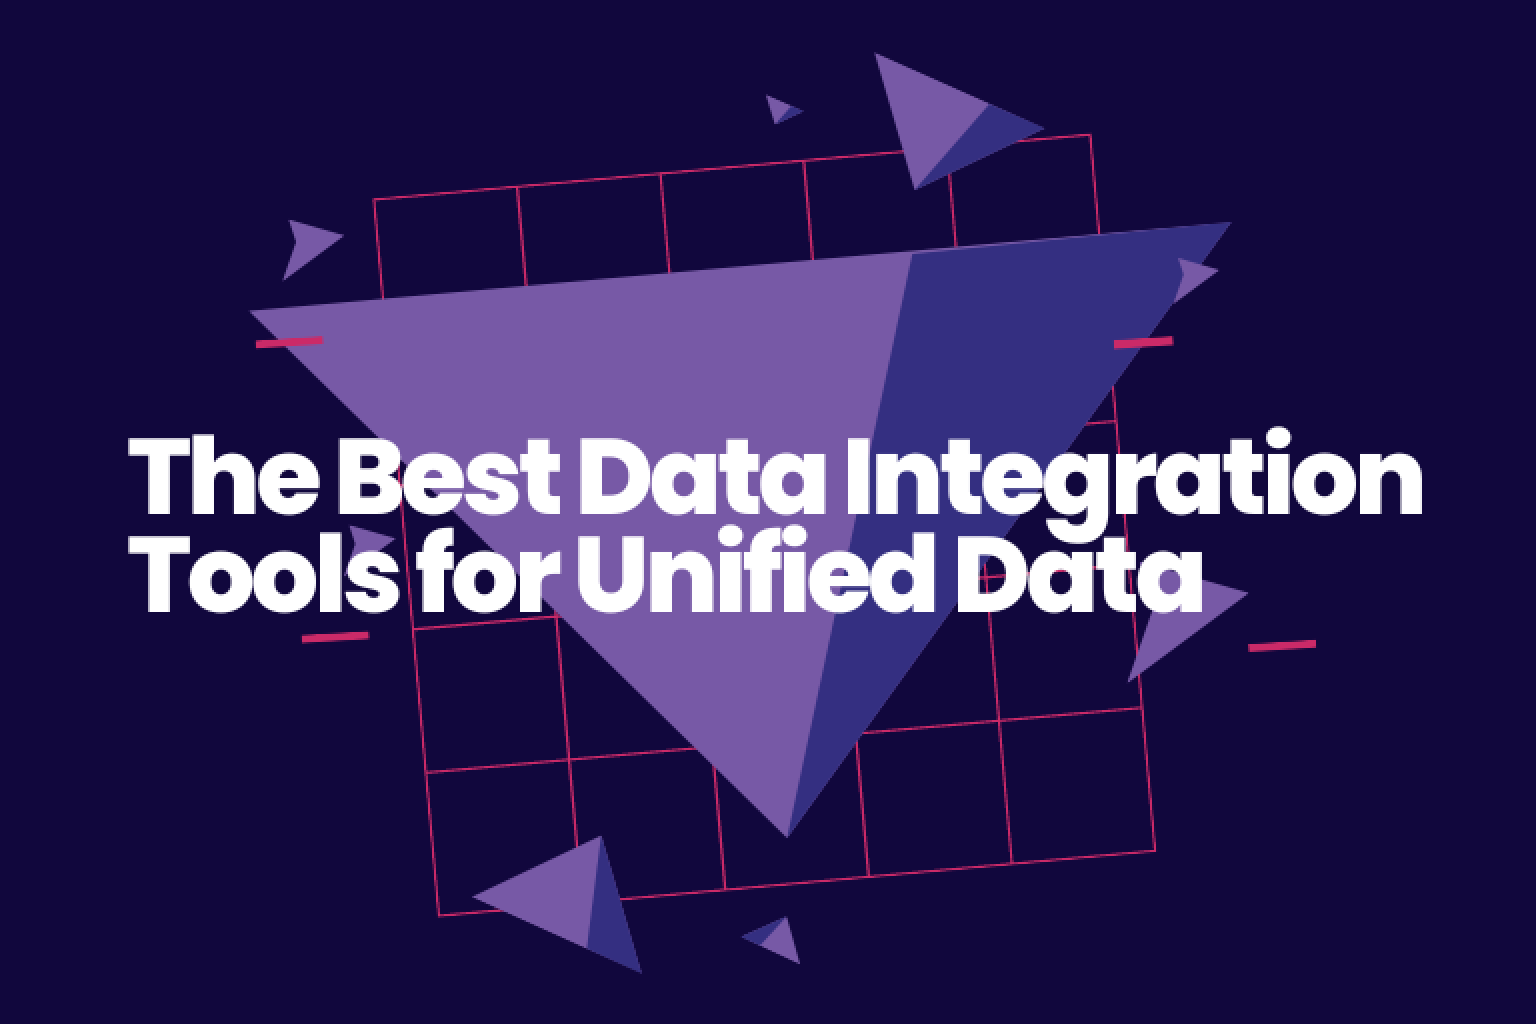 Discover Top 10 Data Integration Tools in this article, which covers critical capabilities, enterprise strategies, Gartner's research, and reviews of popular tools like RATH, Qlik, Microsoft ETL, and more.